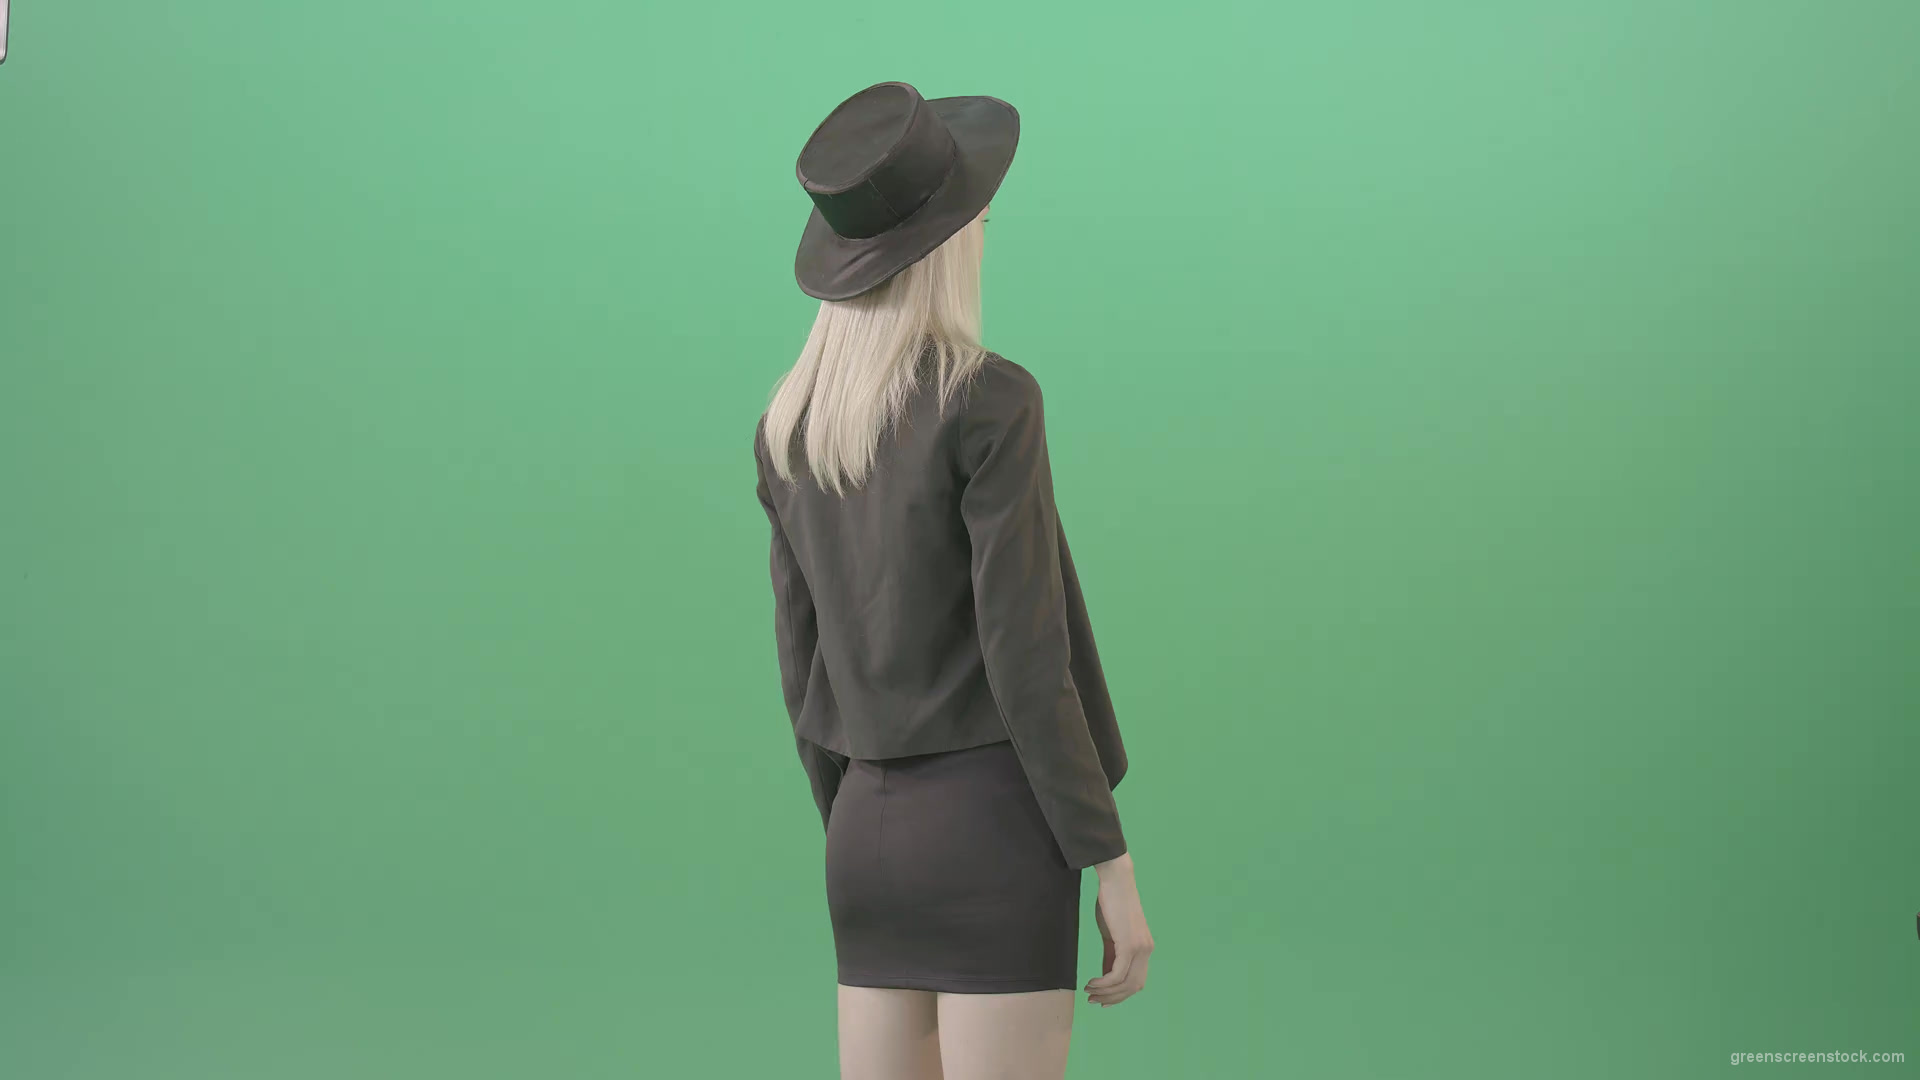 Blonde-Girl-looking-digital-virtual-products-on-touch-screen-from-back-side-4K-Green-Screen-Video-Footage-1920_001 Green Screen Stock